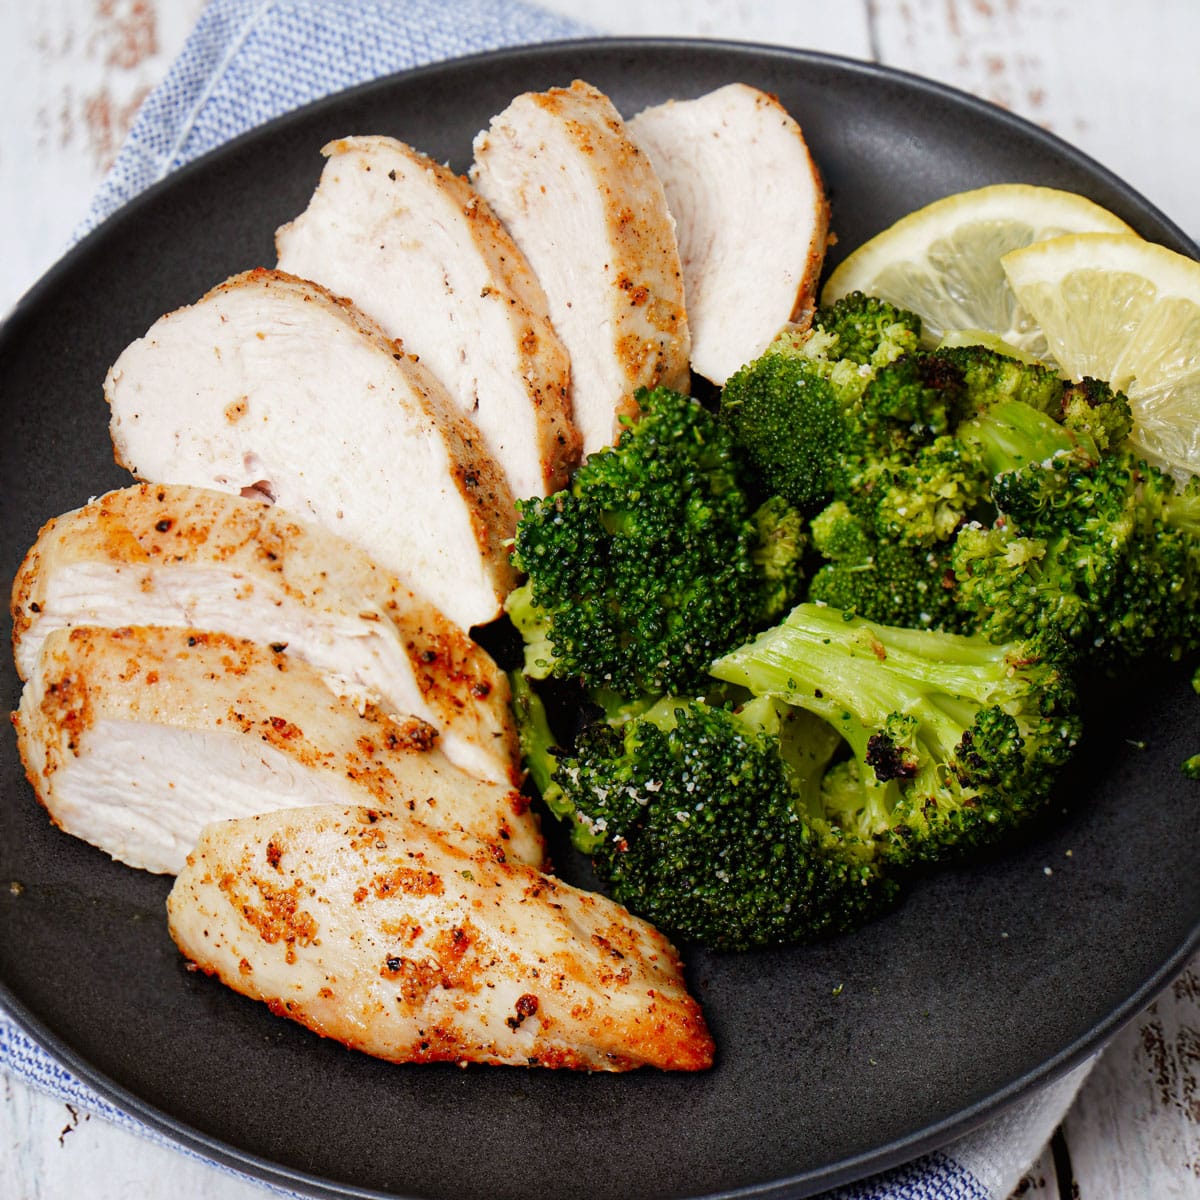 Air fried frozen chicken breast with roasted broccoli and lemon slices.